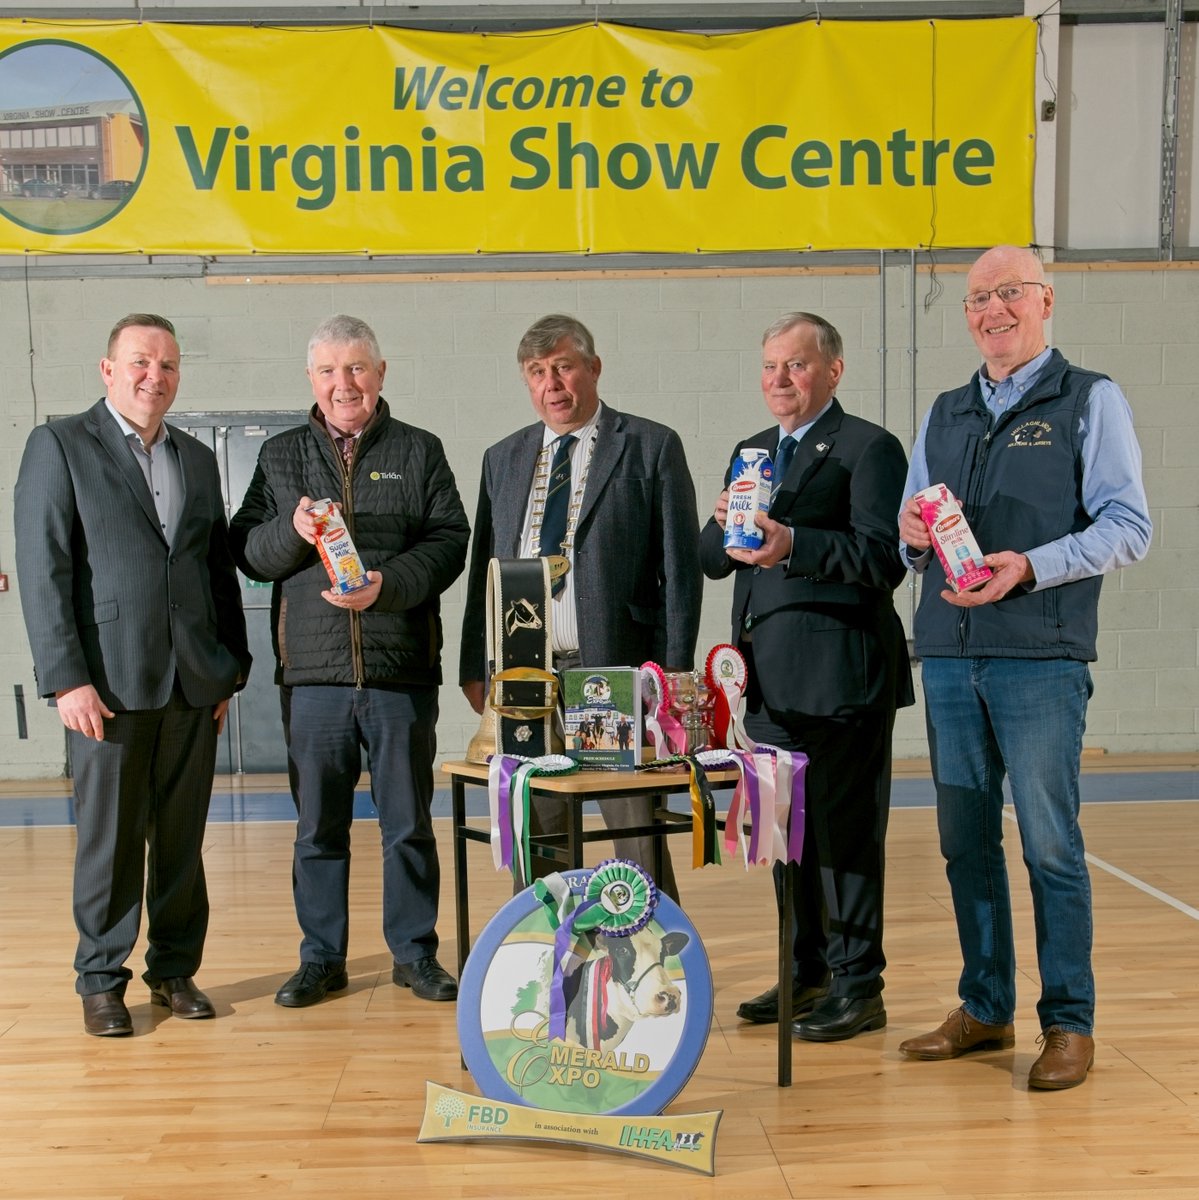 We are proud to sponsor the IHFA Emerald Expo 2024 at the Virginia Show Centre, April 27. Pictured at launch: Laurence Feeney CE IHFA, Denis O’Sullivan Tirlán, Richard Hamilton IHFA President, Richard Whelan Emerald Expo Show Director & Pat Gaynor Breffni Oriel Club & Committee.